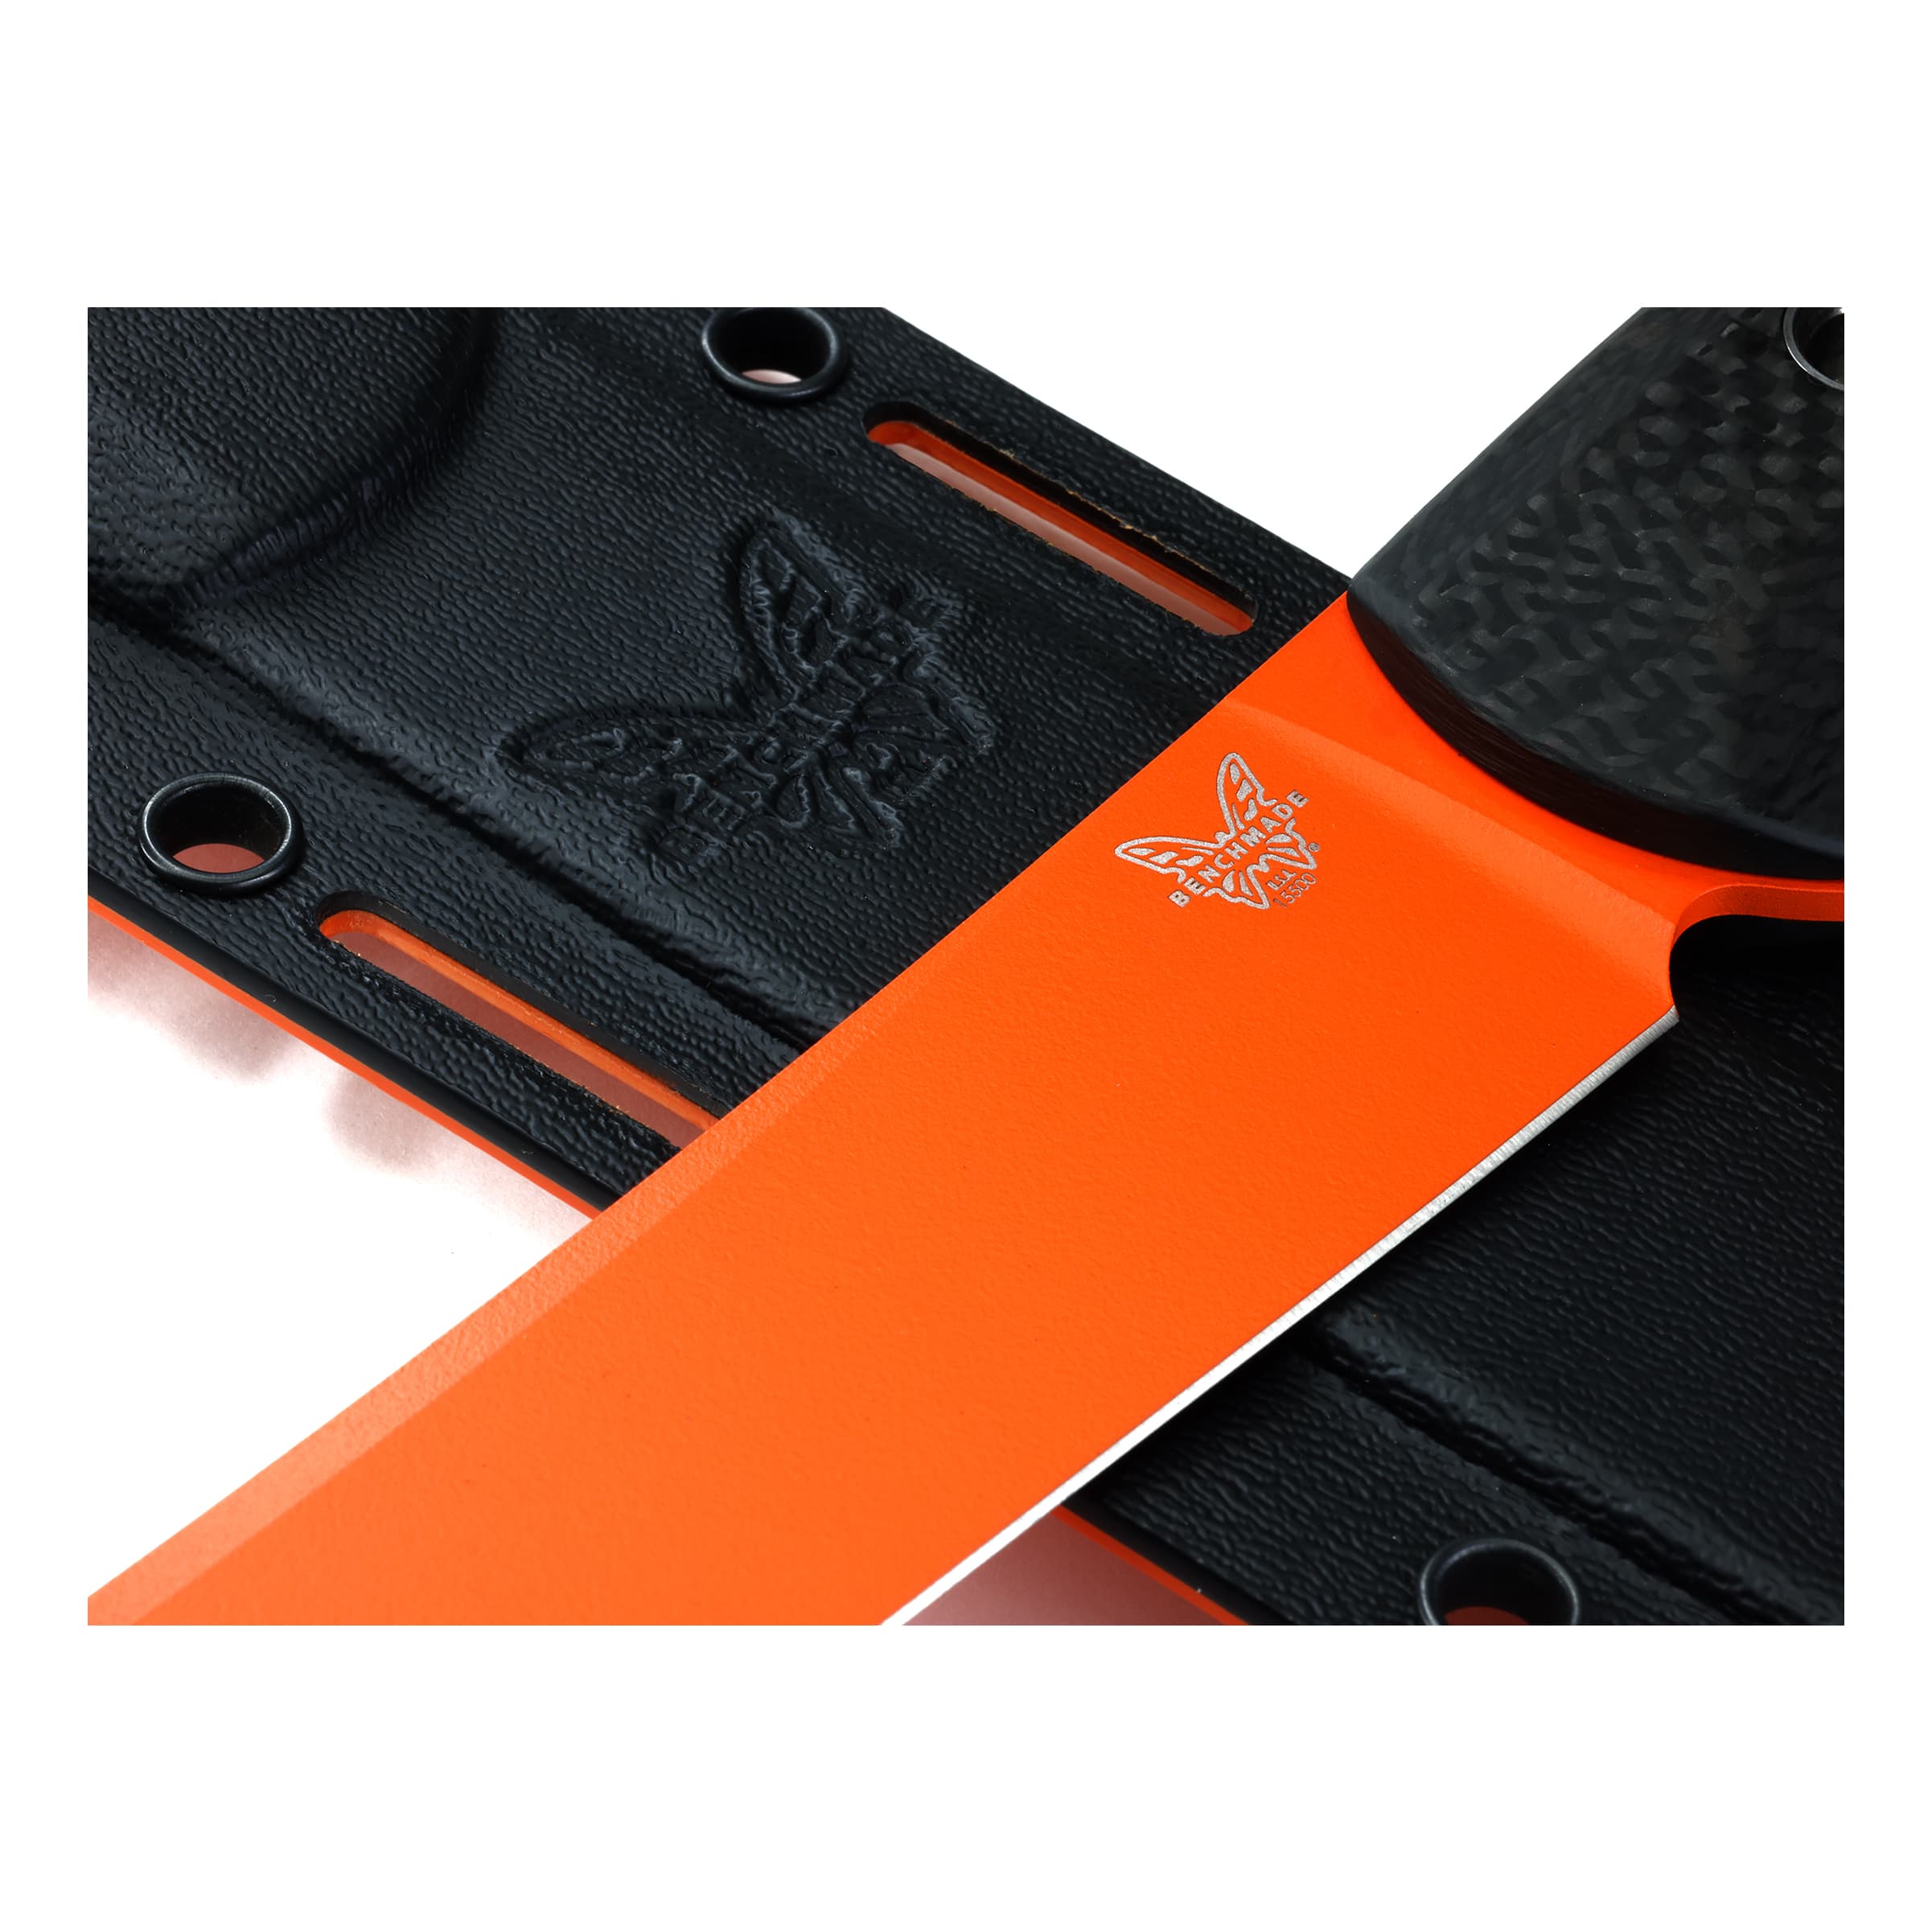 Benchmade® Meatcrafter® Fixed Blade Knife